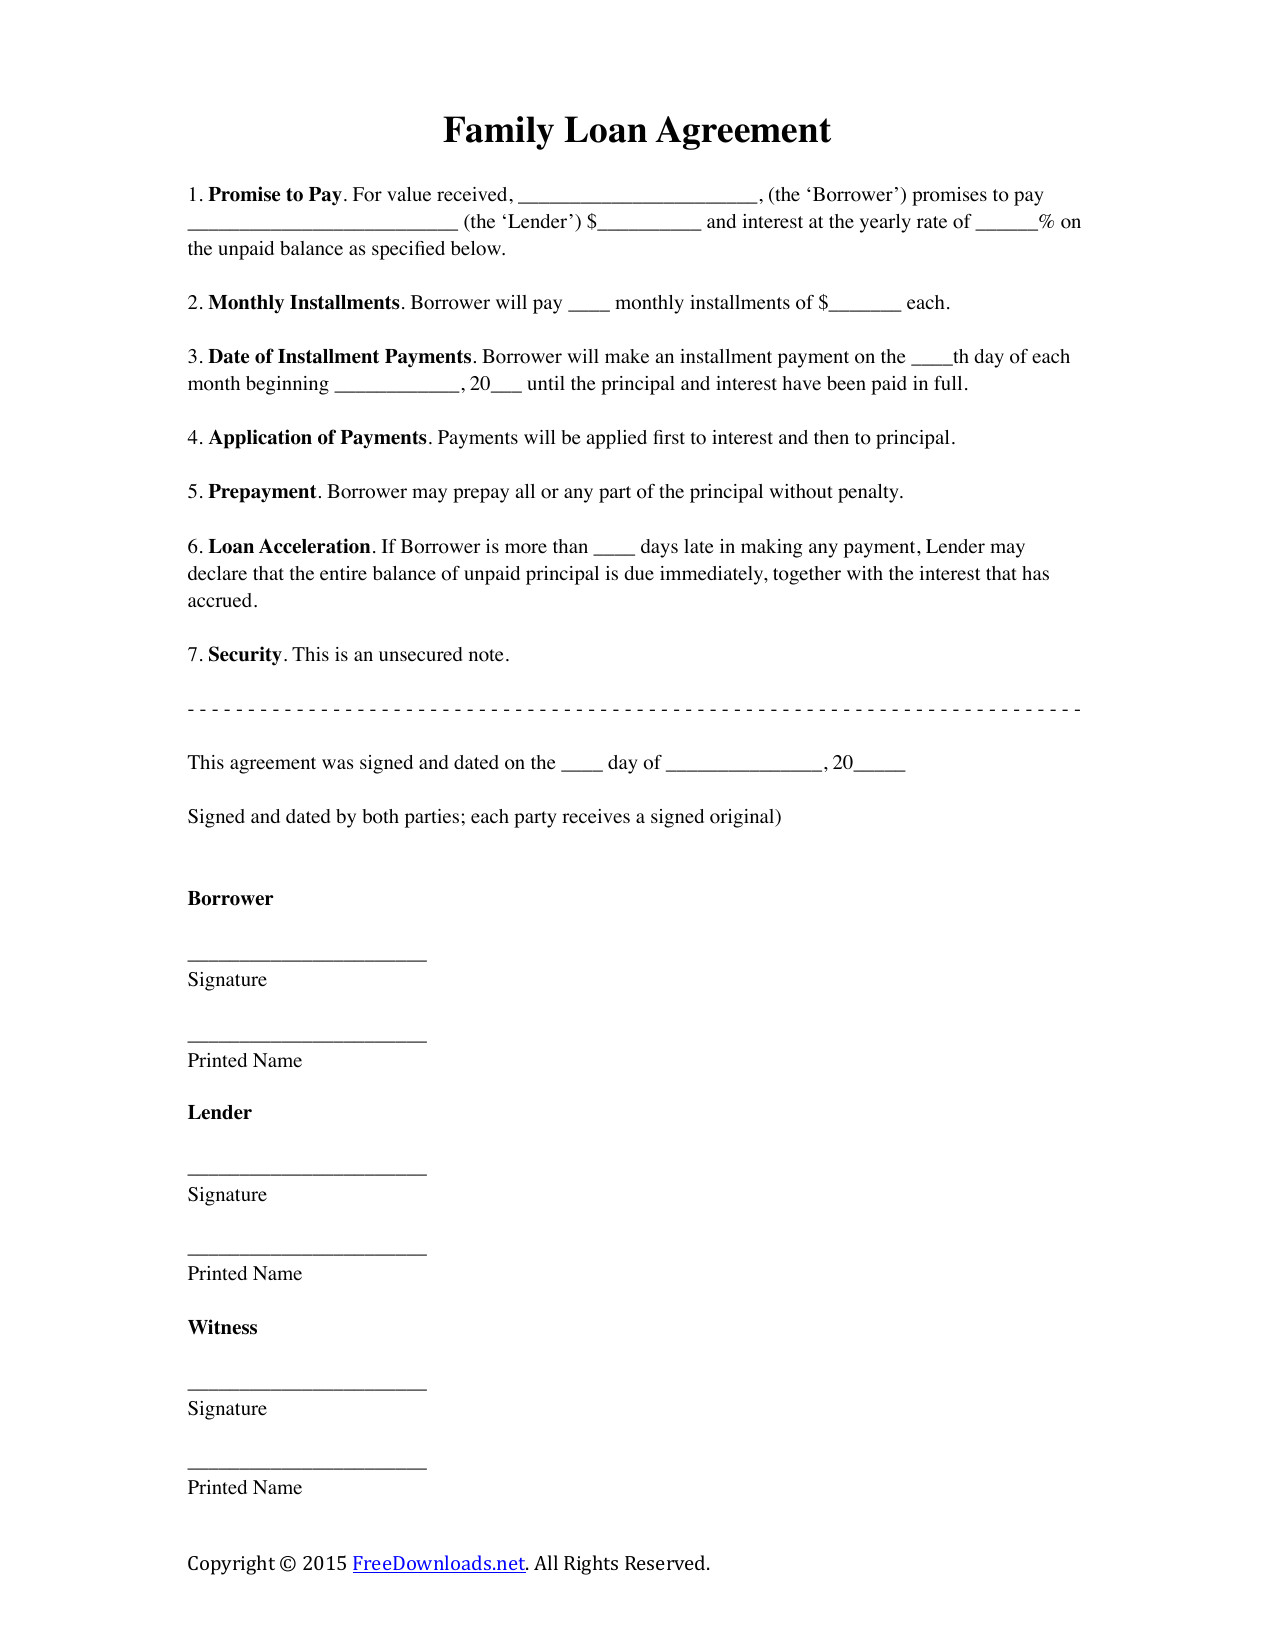 family loan agreement template 2